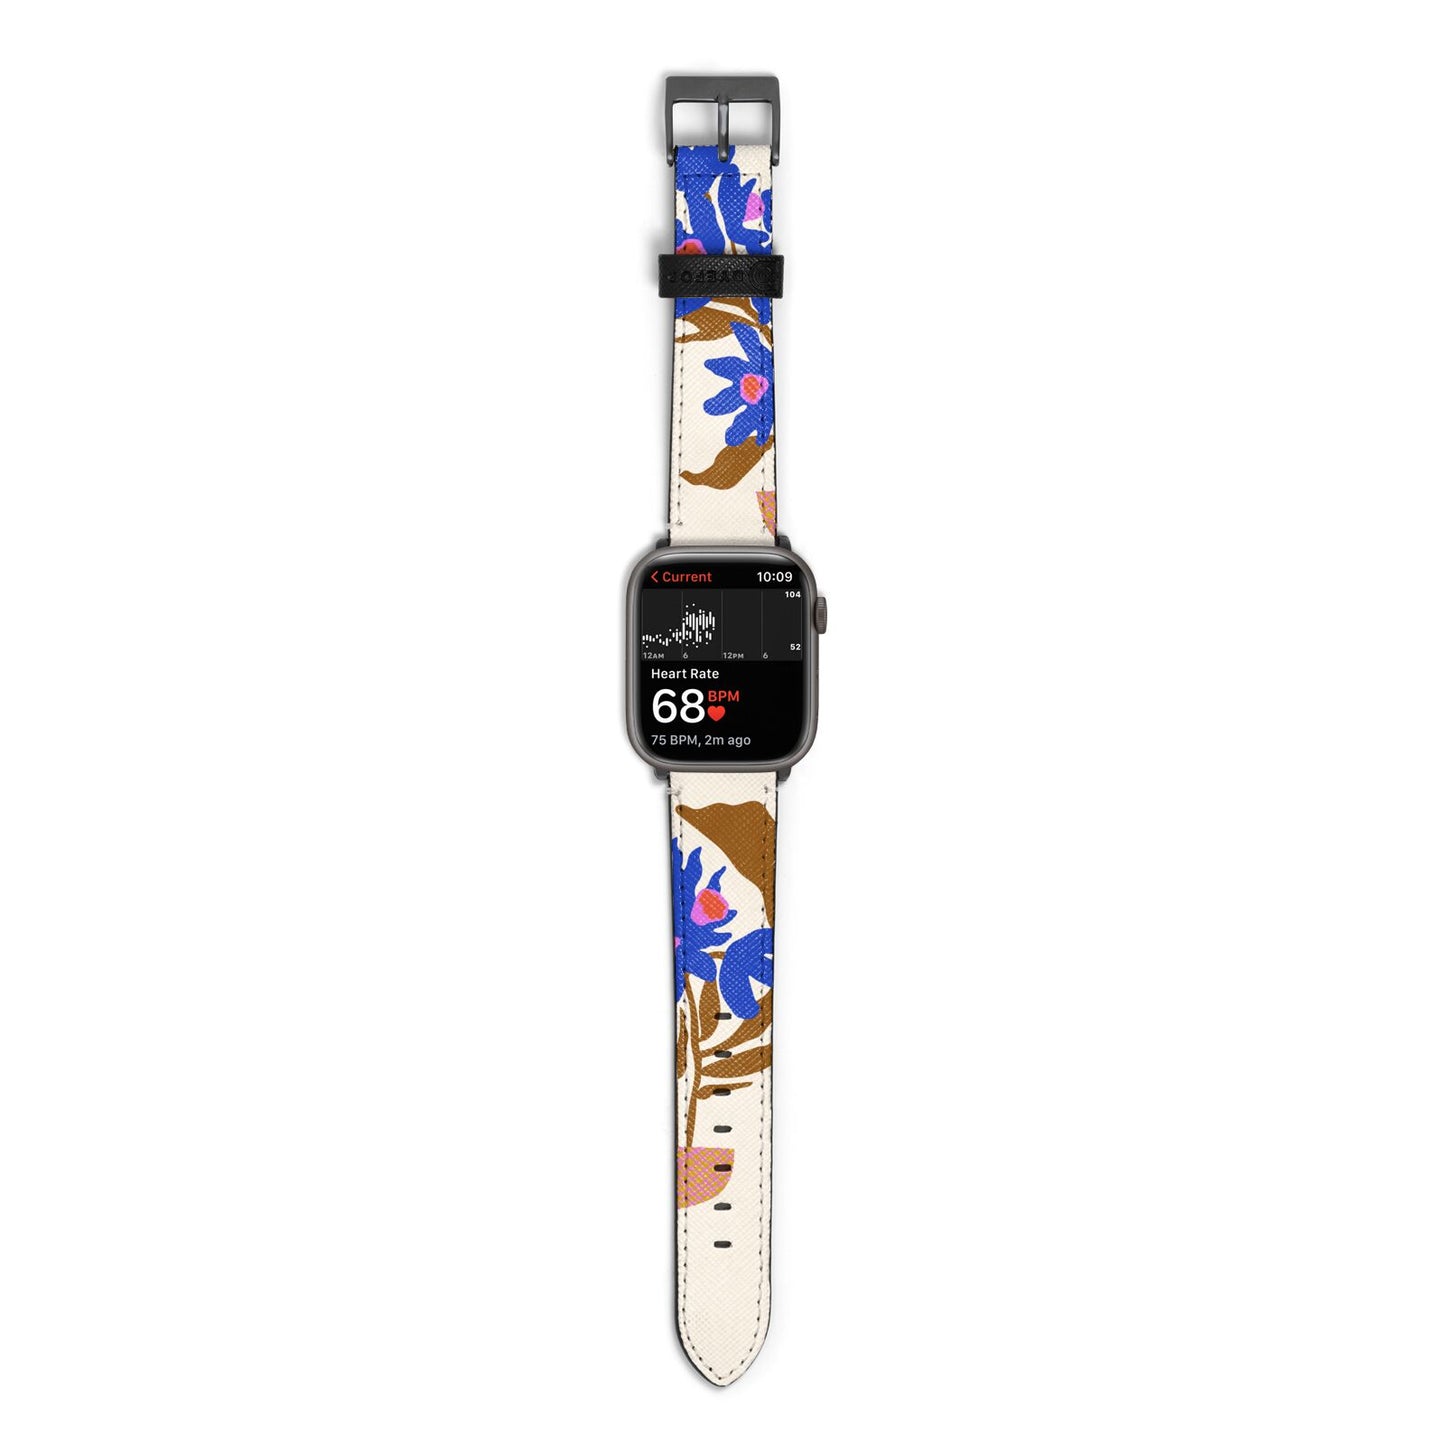 Flowers in a Vase Apple Watch Strap Size 38mm with Space Grey Hardware